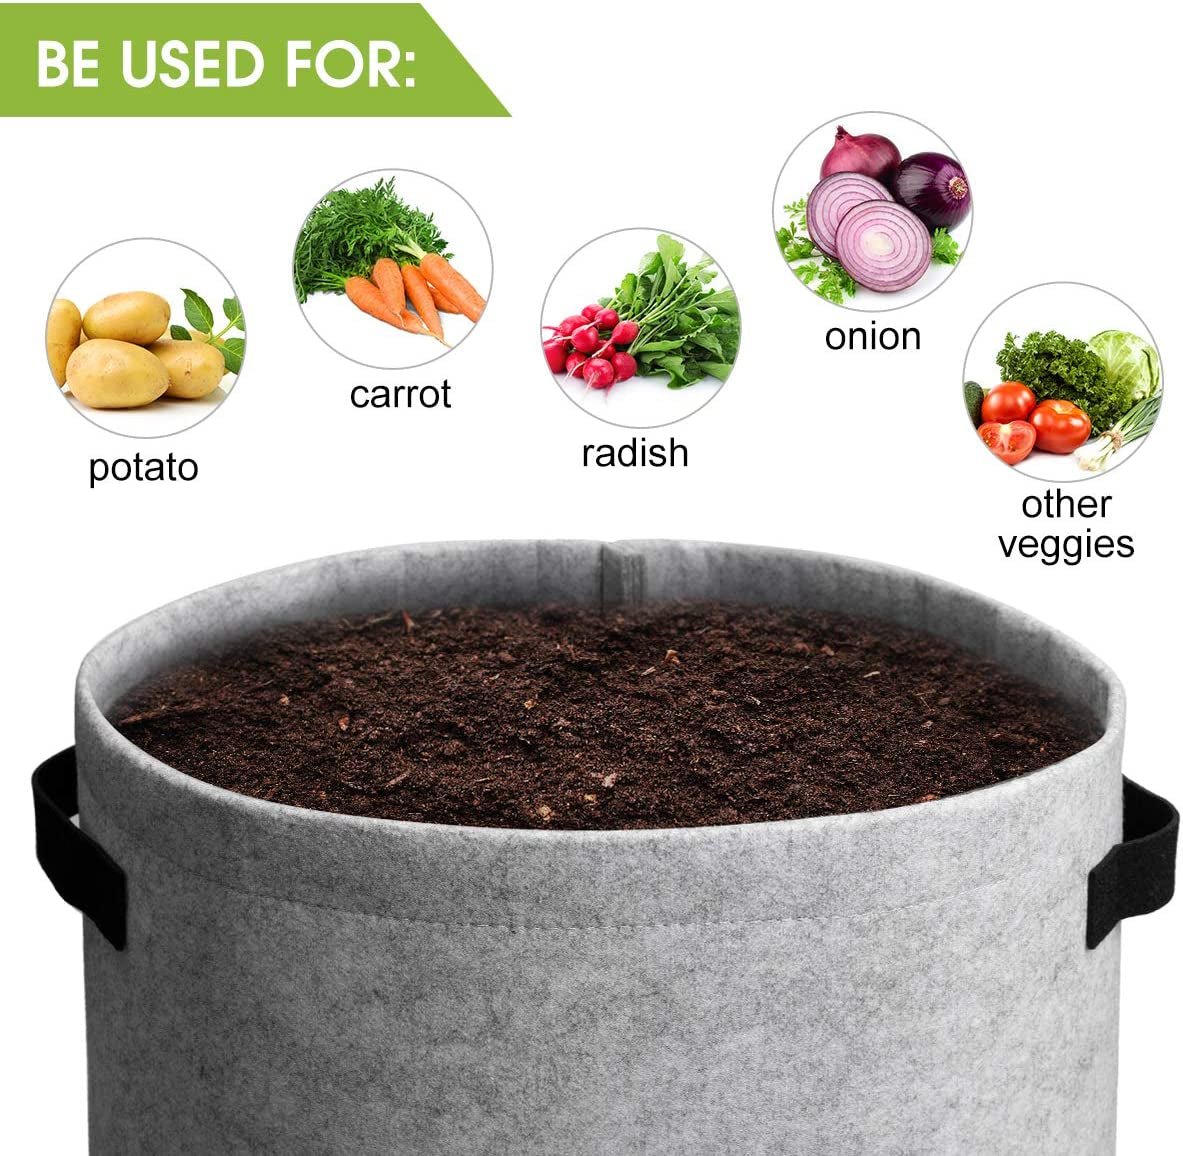 4 Pack Planter Pot with Handles and Harvest Window for Potato Tomato and Vegetables, Black and Gray 10 Gallon